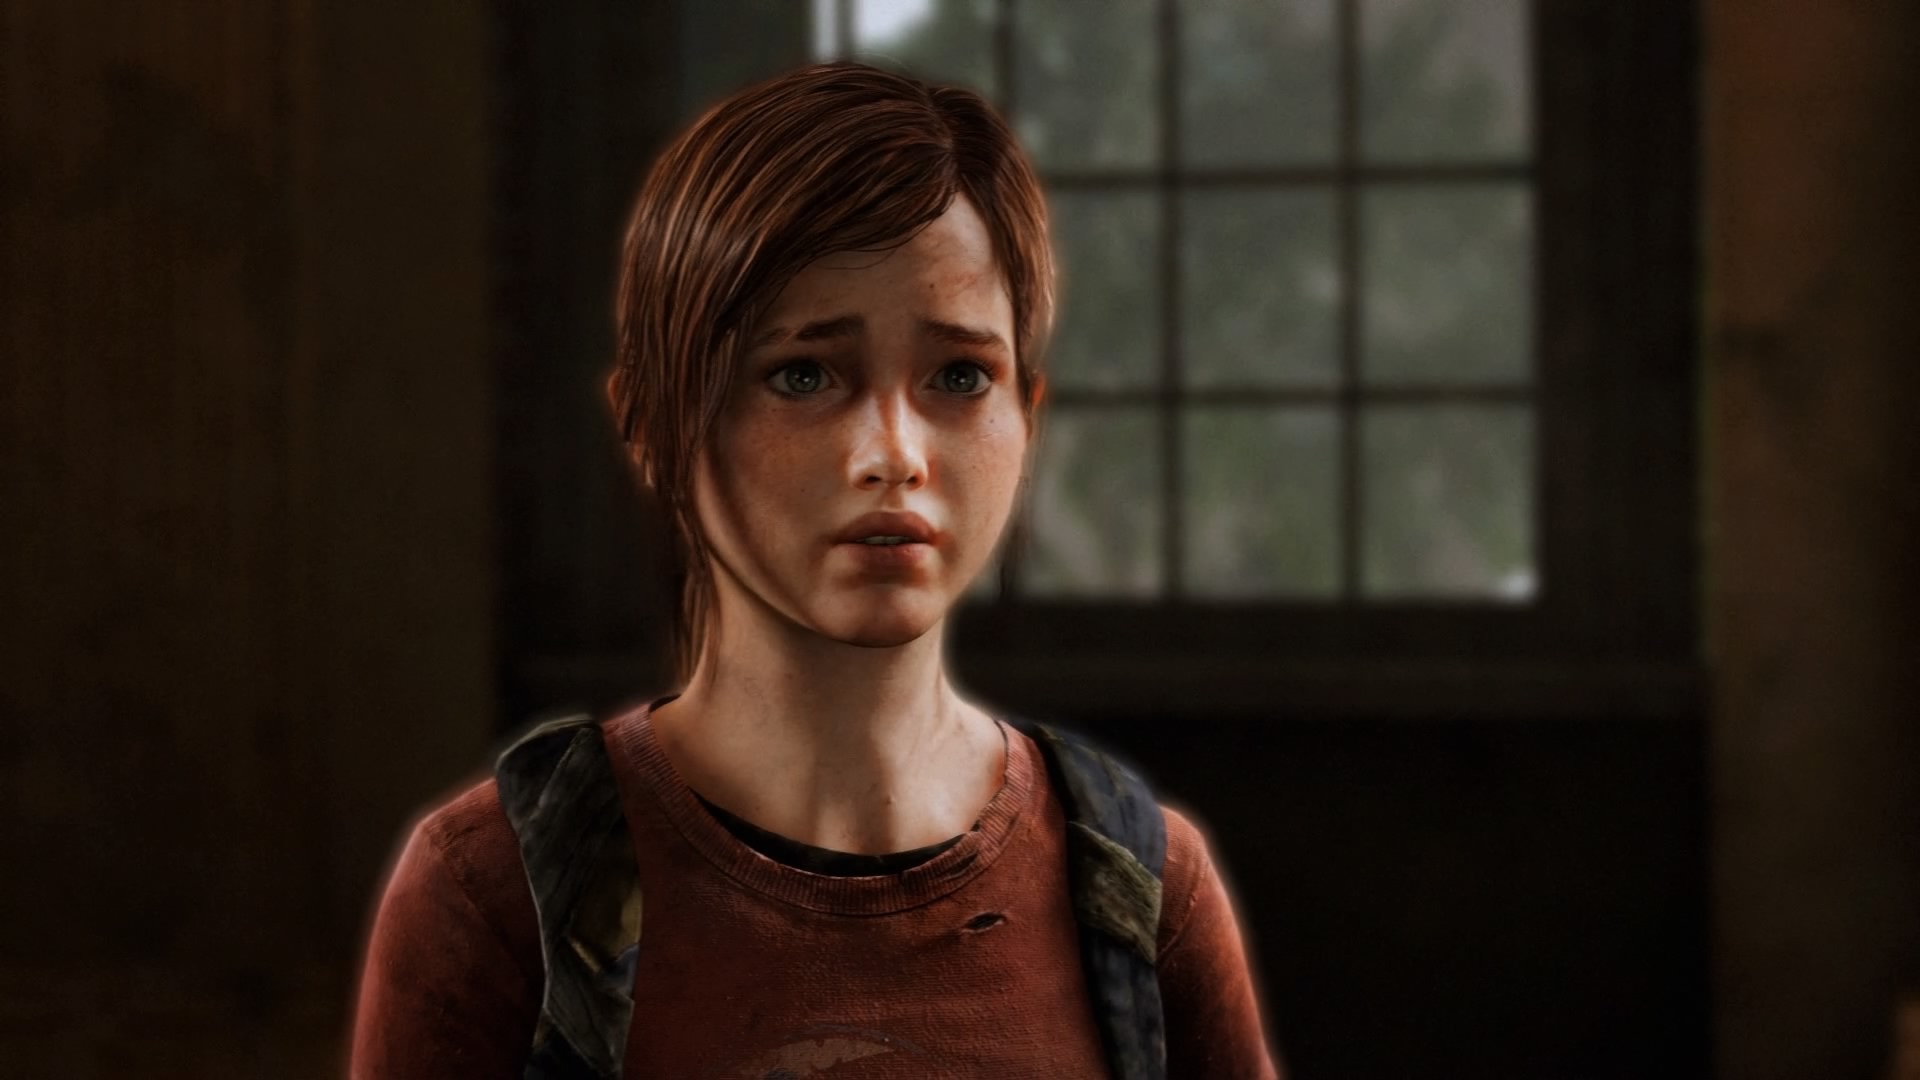 The Last Of Us Wallpaper (child ellie) by emrekyy1 on DeviantArt